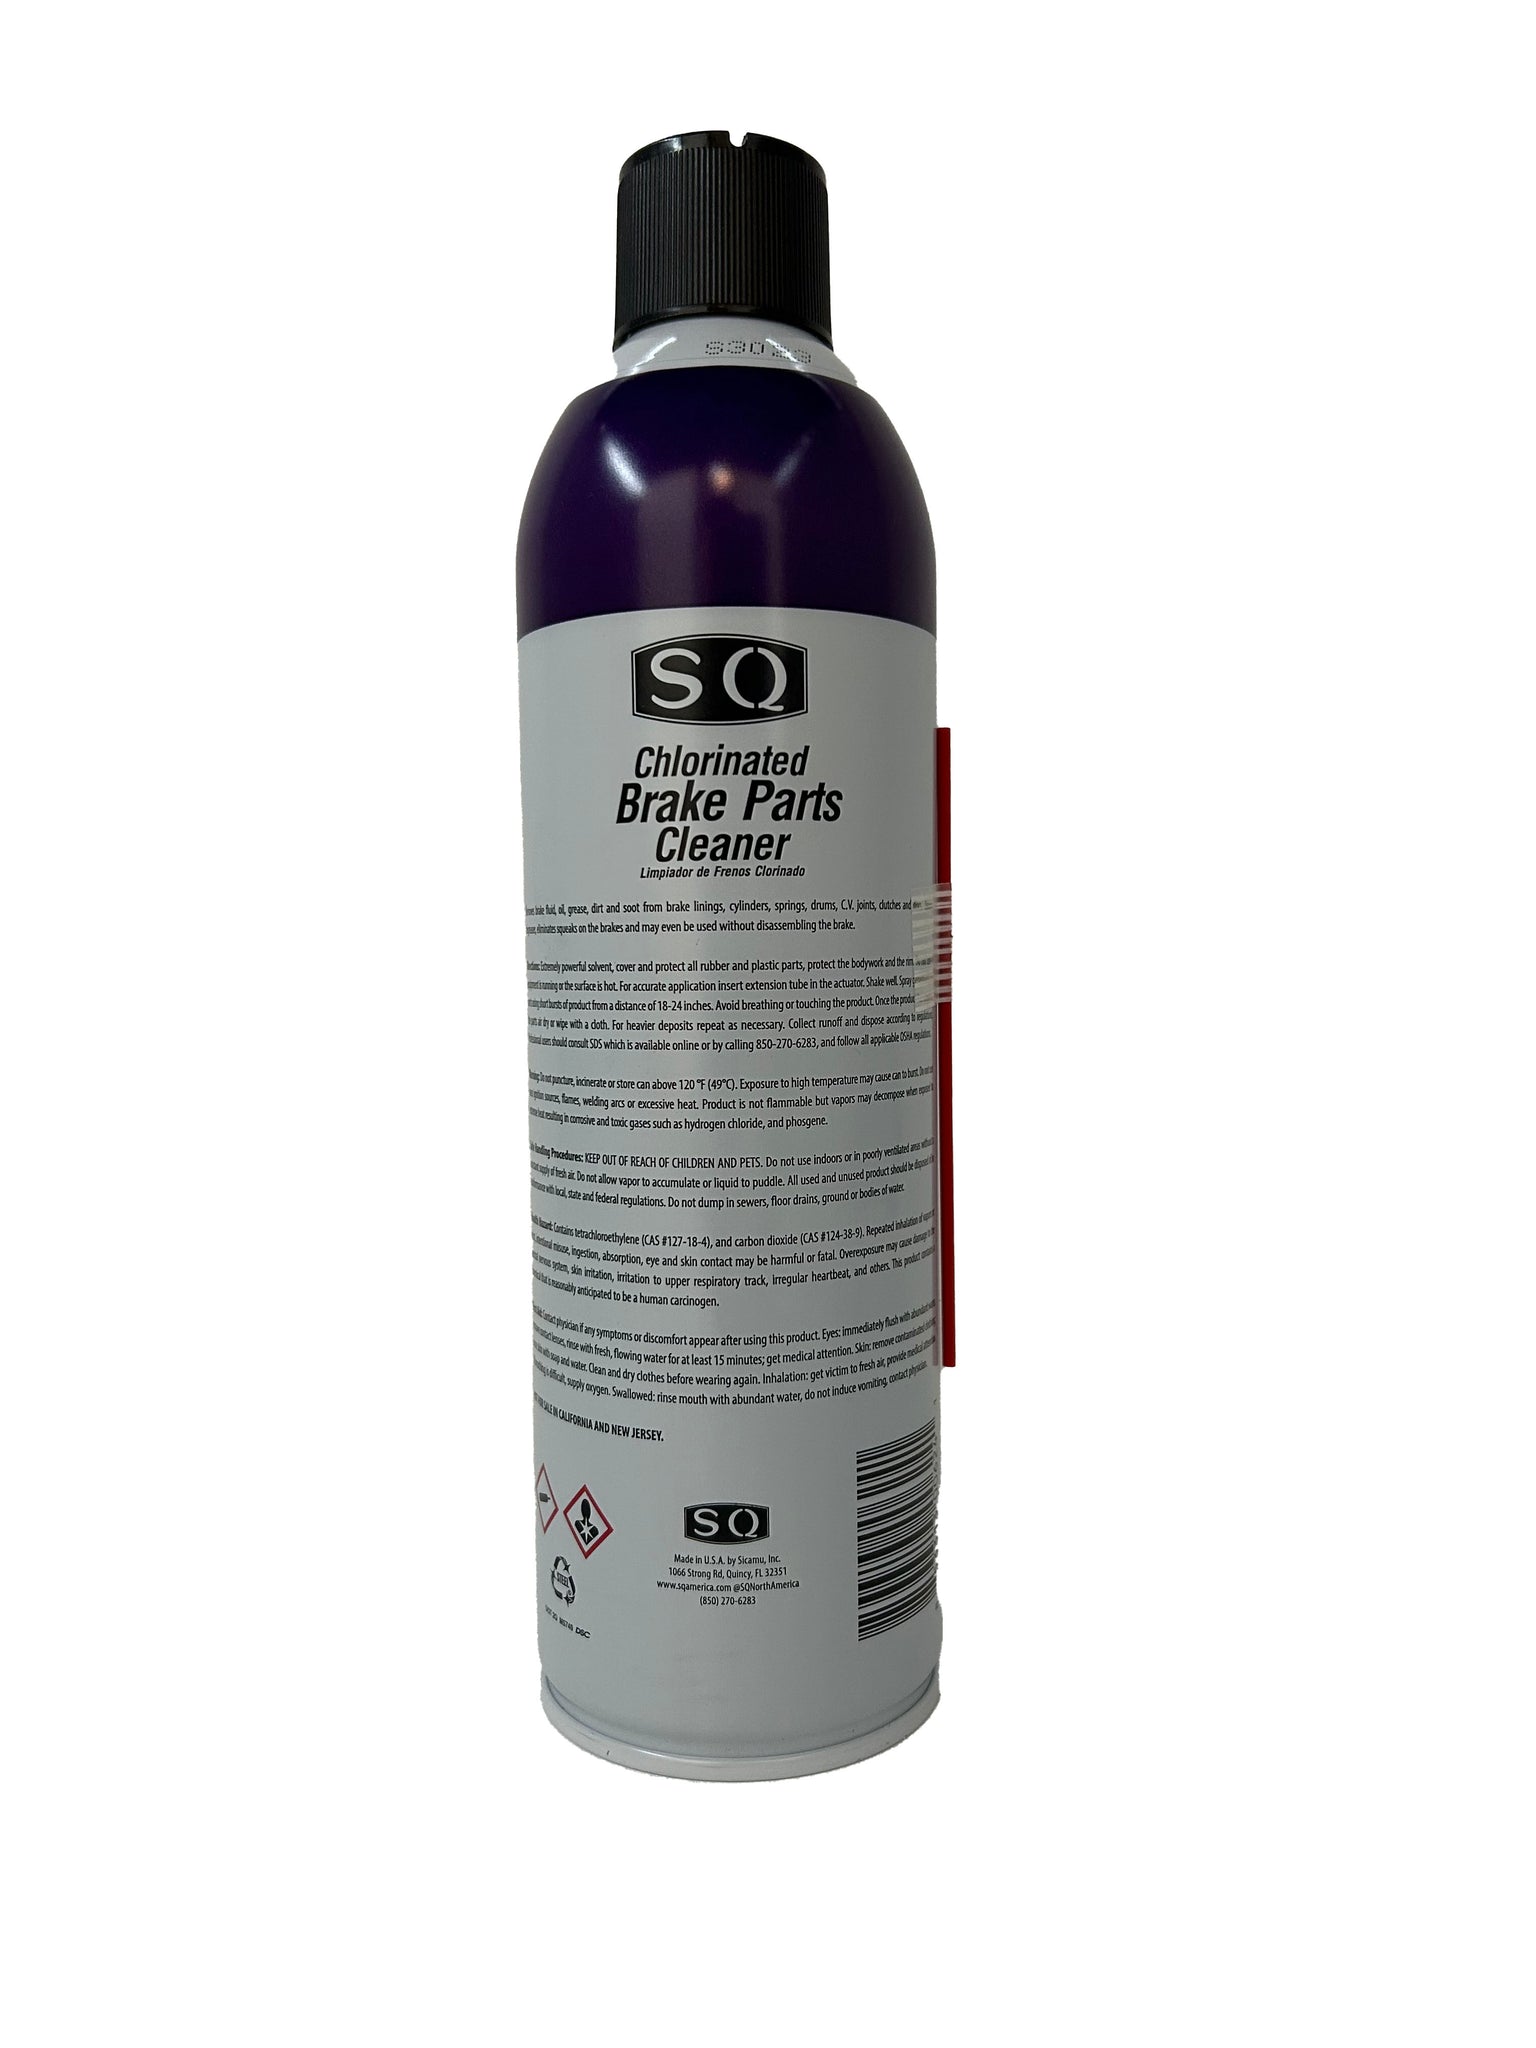 Quality Chemical / Brake Parts Cleaner / Heavy-Duty-Non